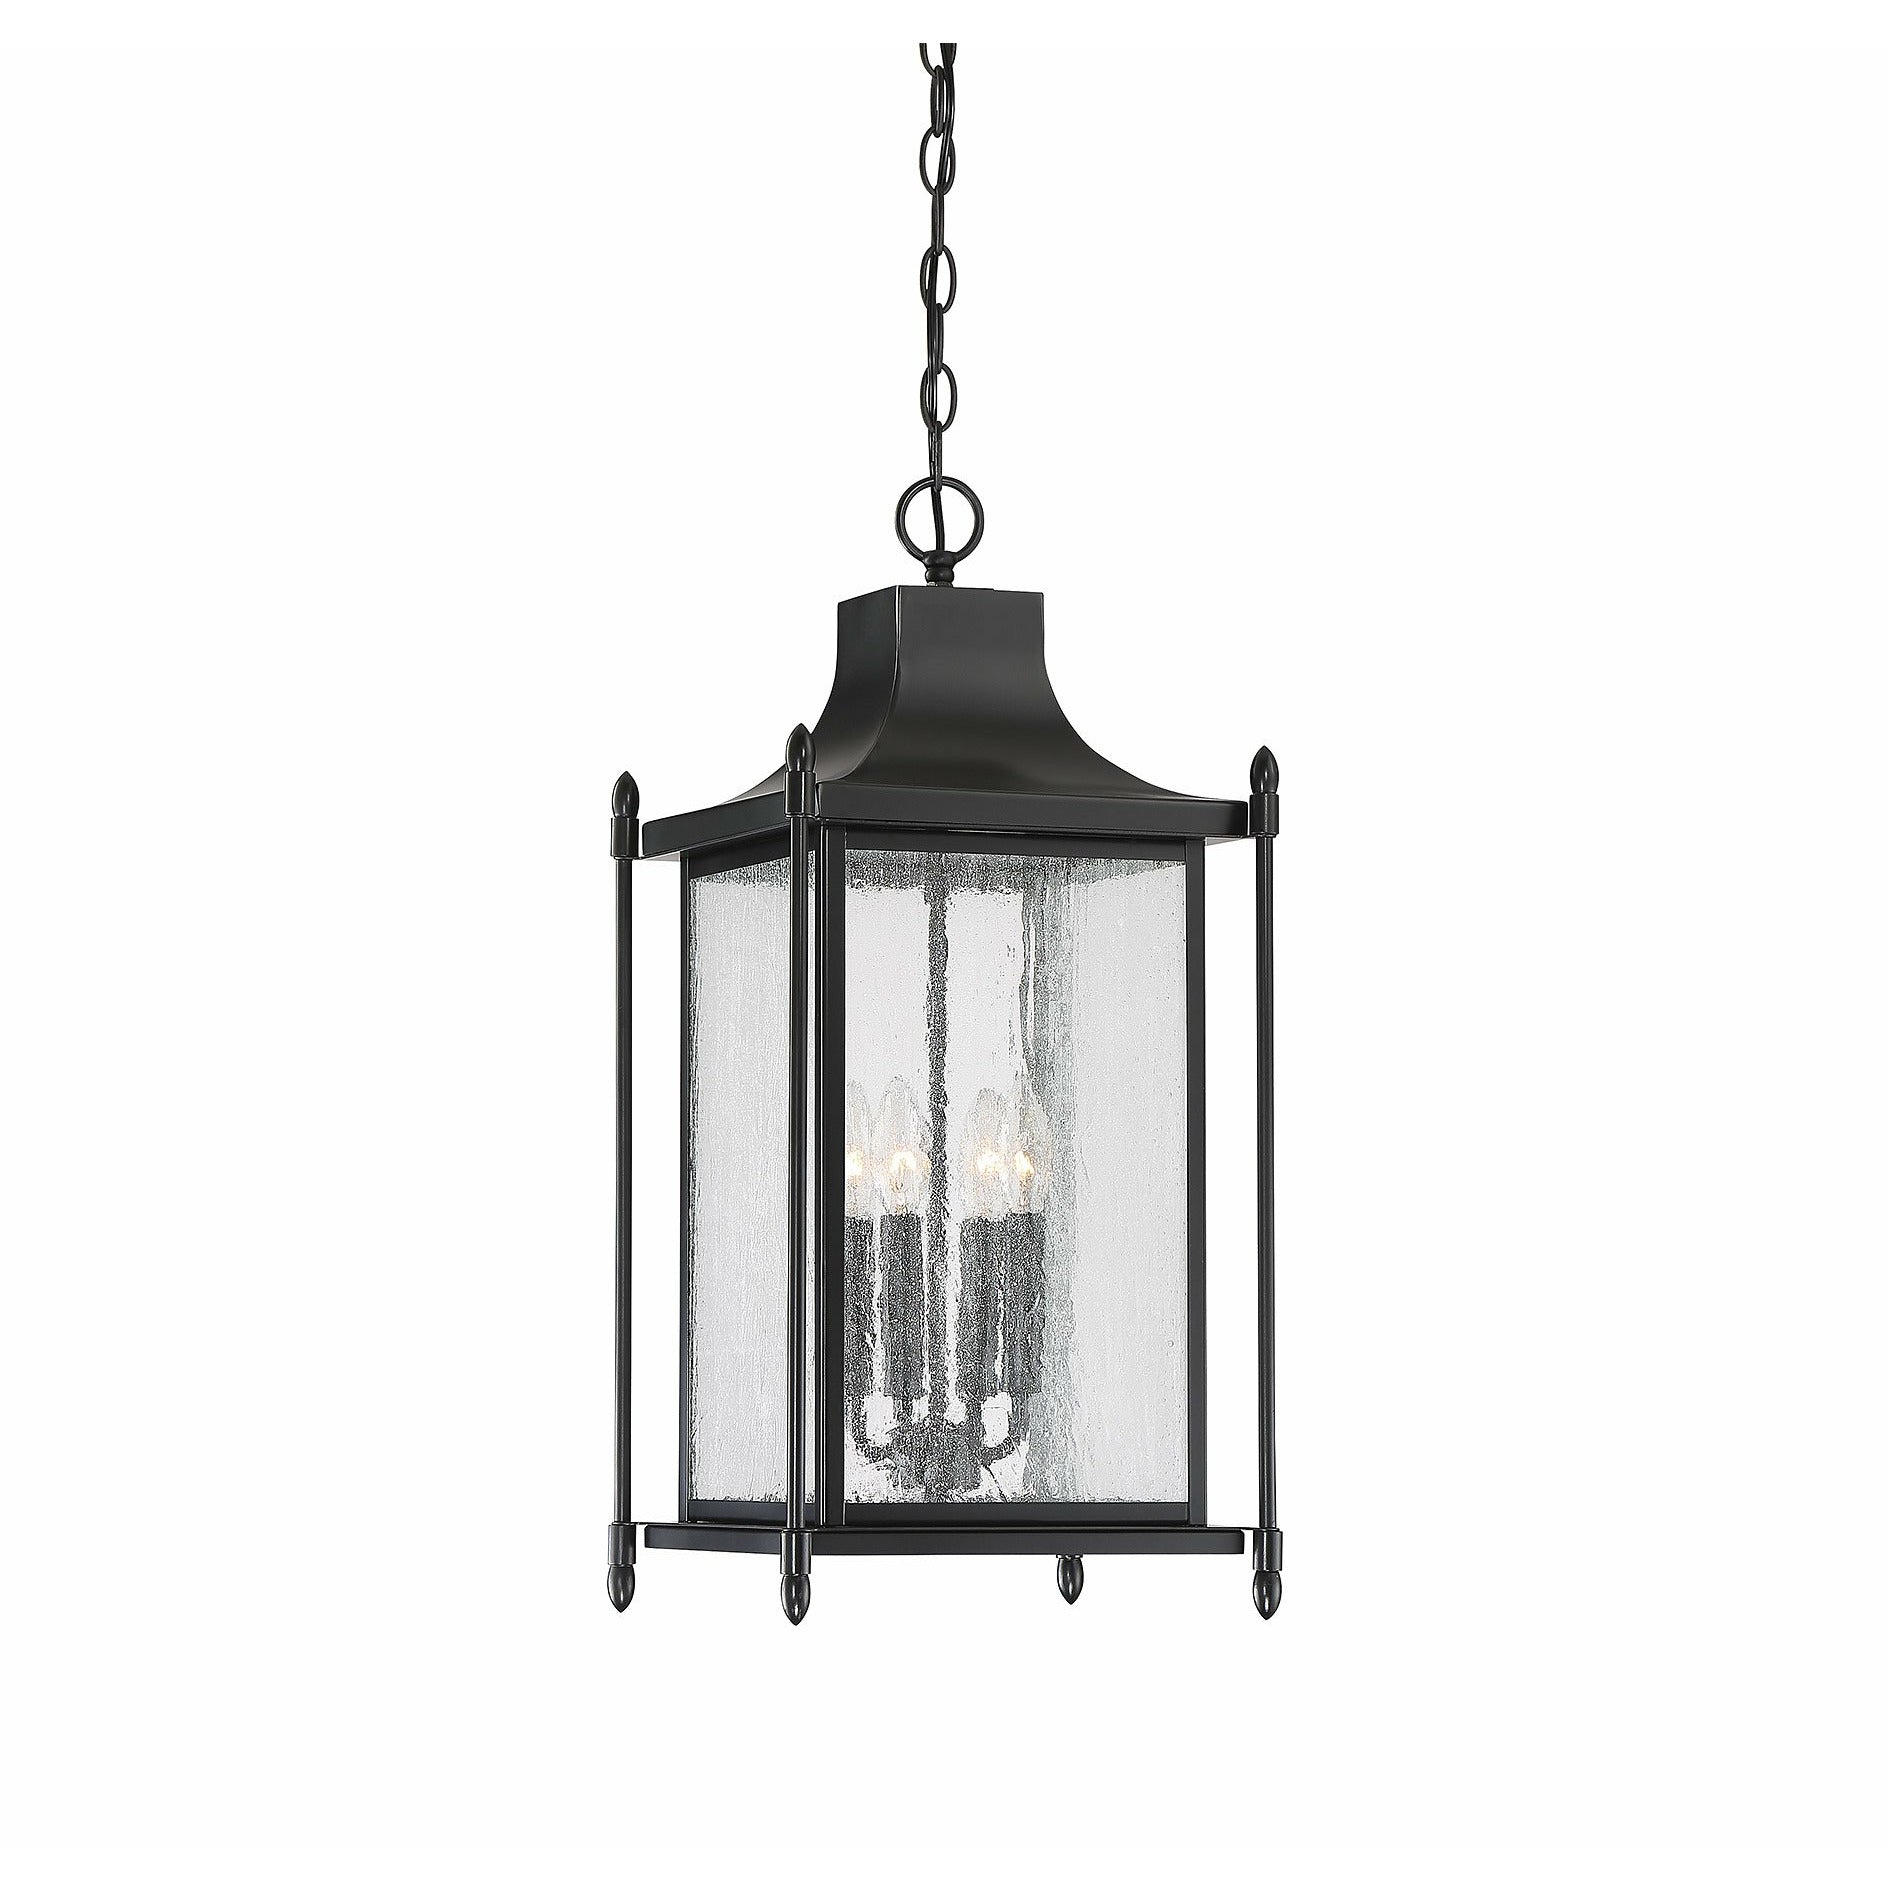 Dunnmore Outdoor Pendant Black